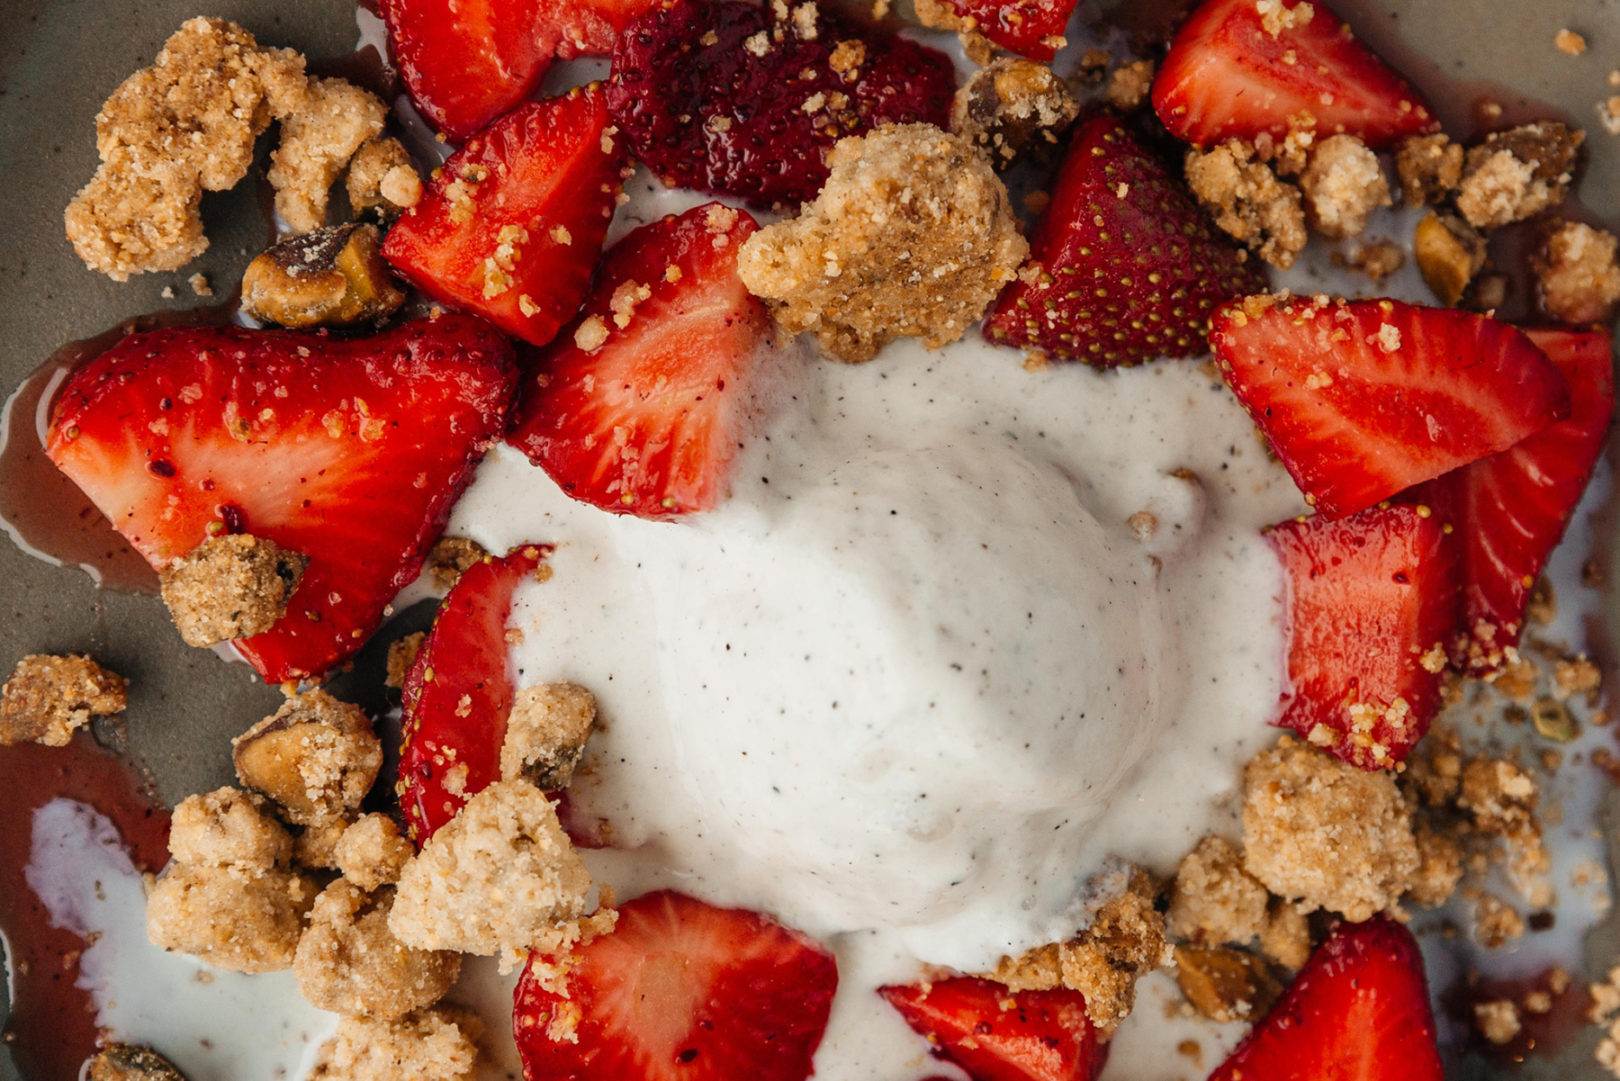 pistachio crumbles with strawberries and ice cream